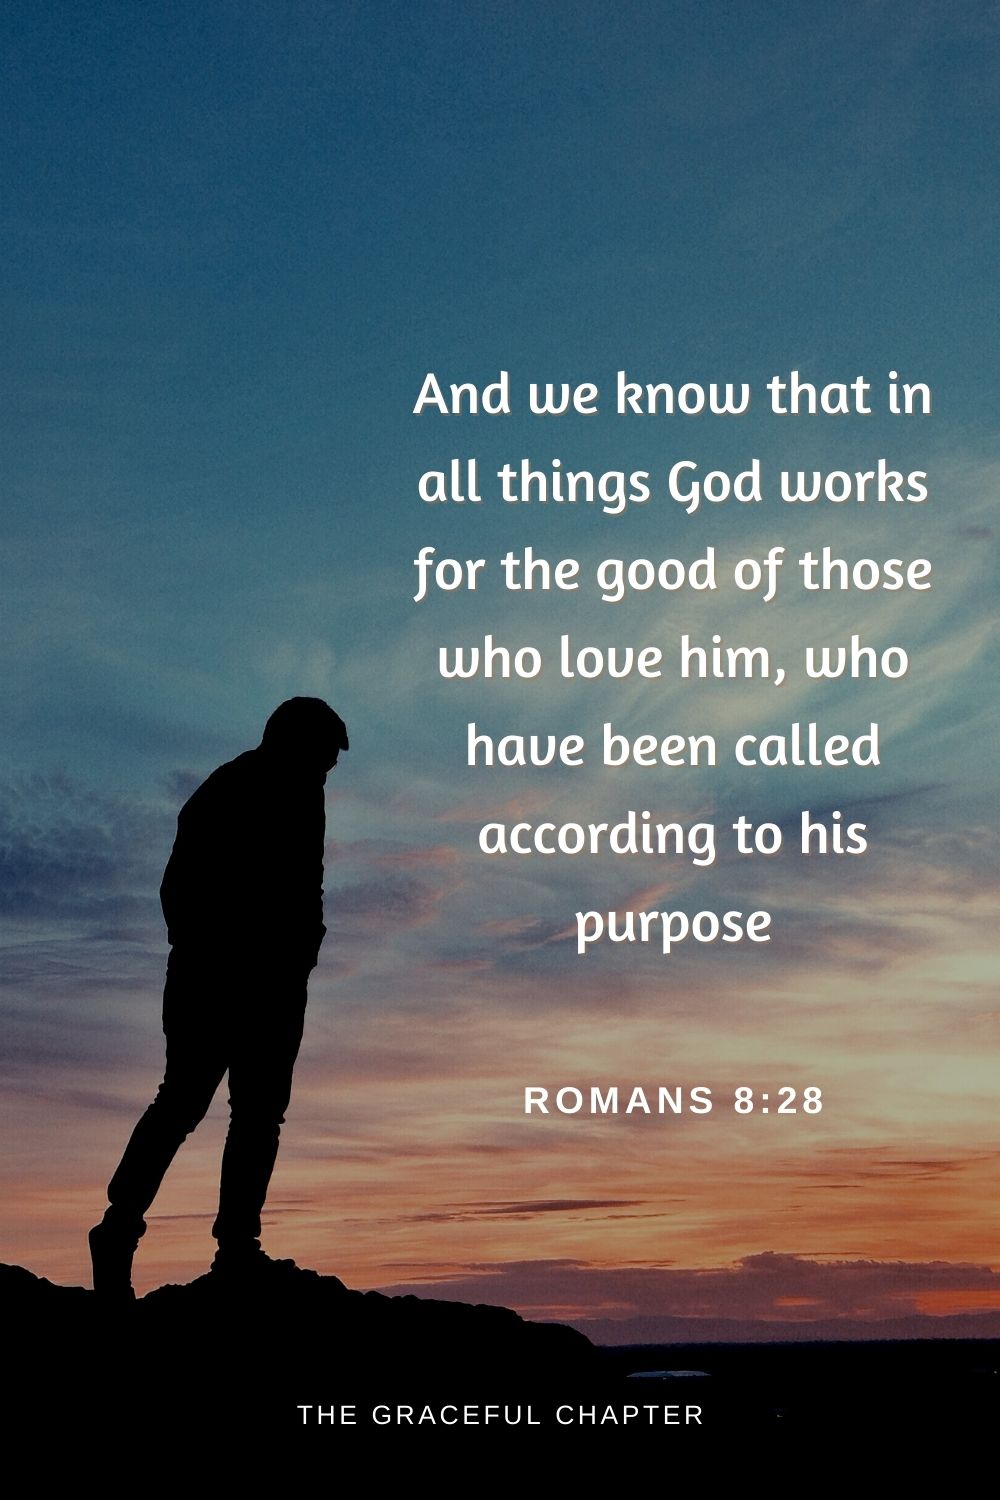 And we know that in all things God works for the good of those who love him, who have been called according to his purpose